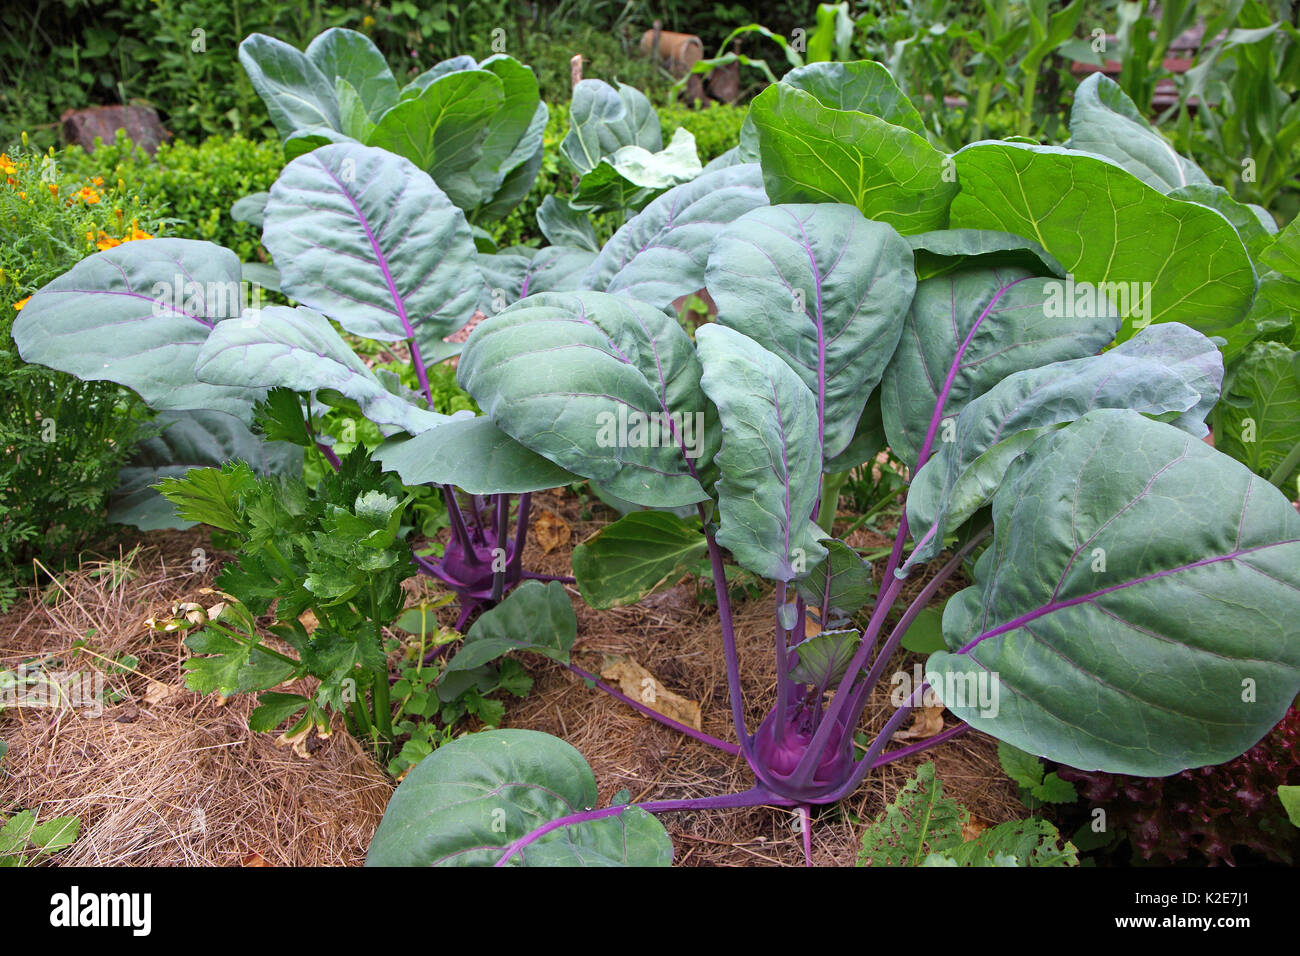 Kohlrabi (Brassica oleracea), floor covering with grass cut against dehydration, Germany Stock Photo